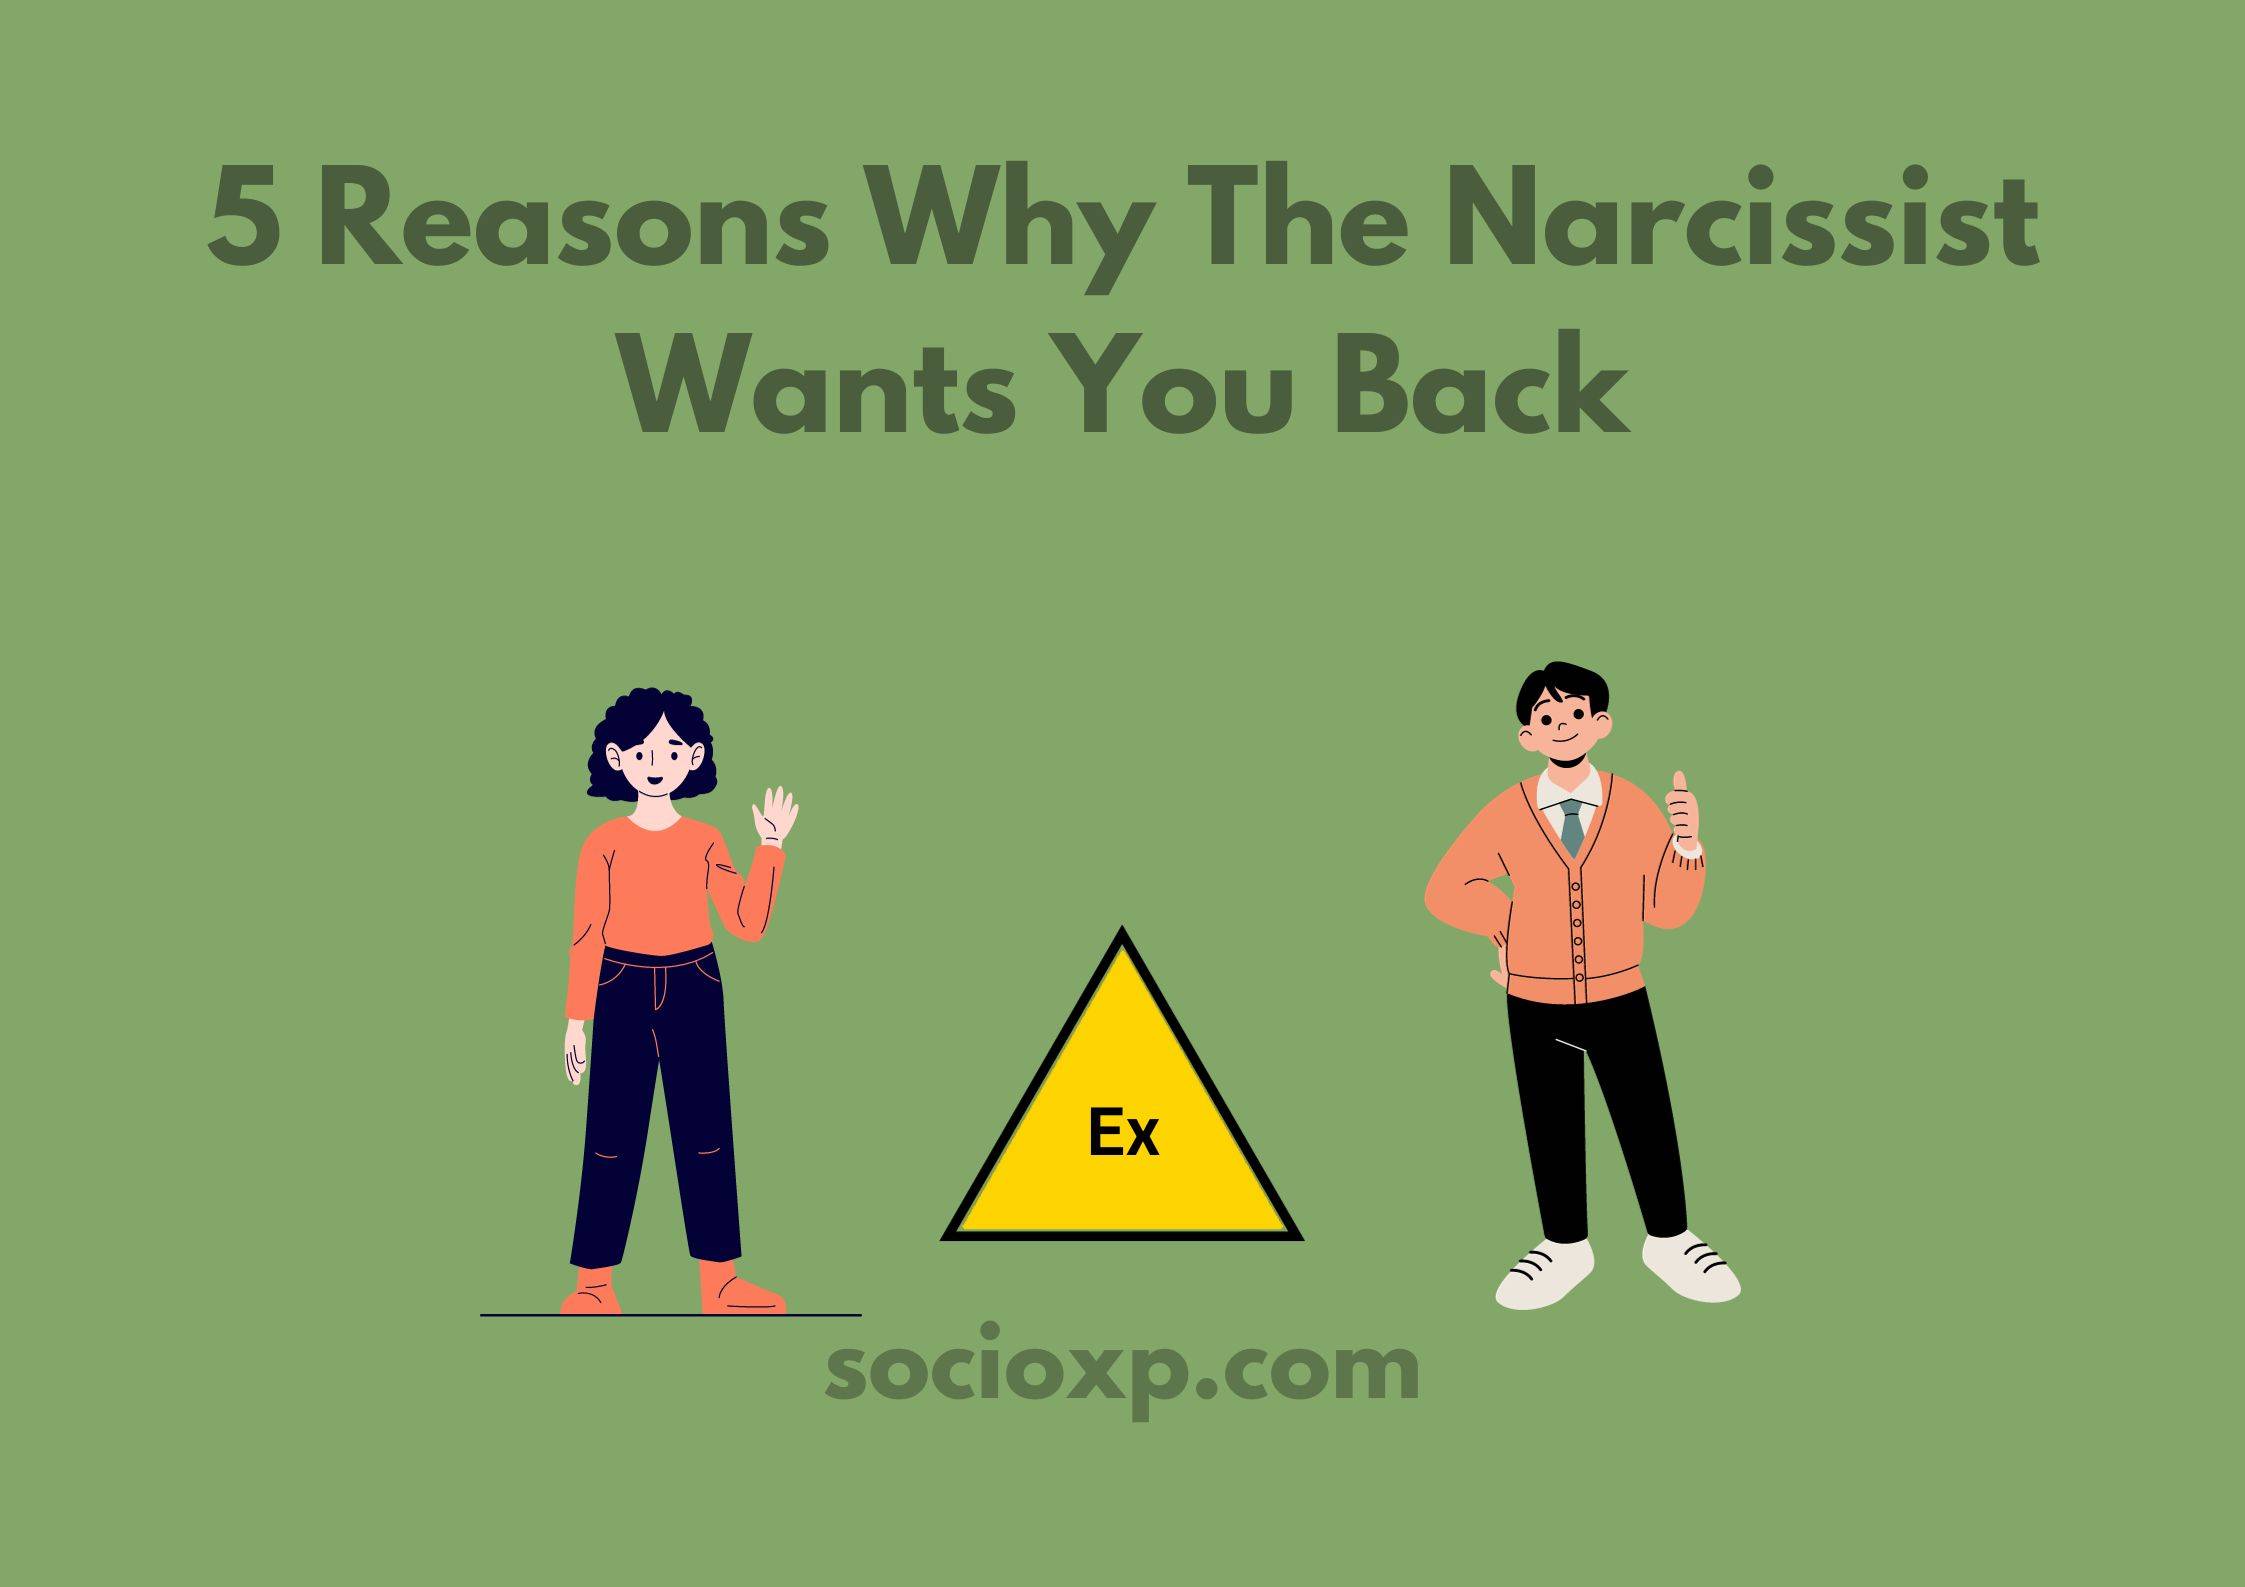 5 Reasons Why The Narcissist Wants You Back